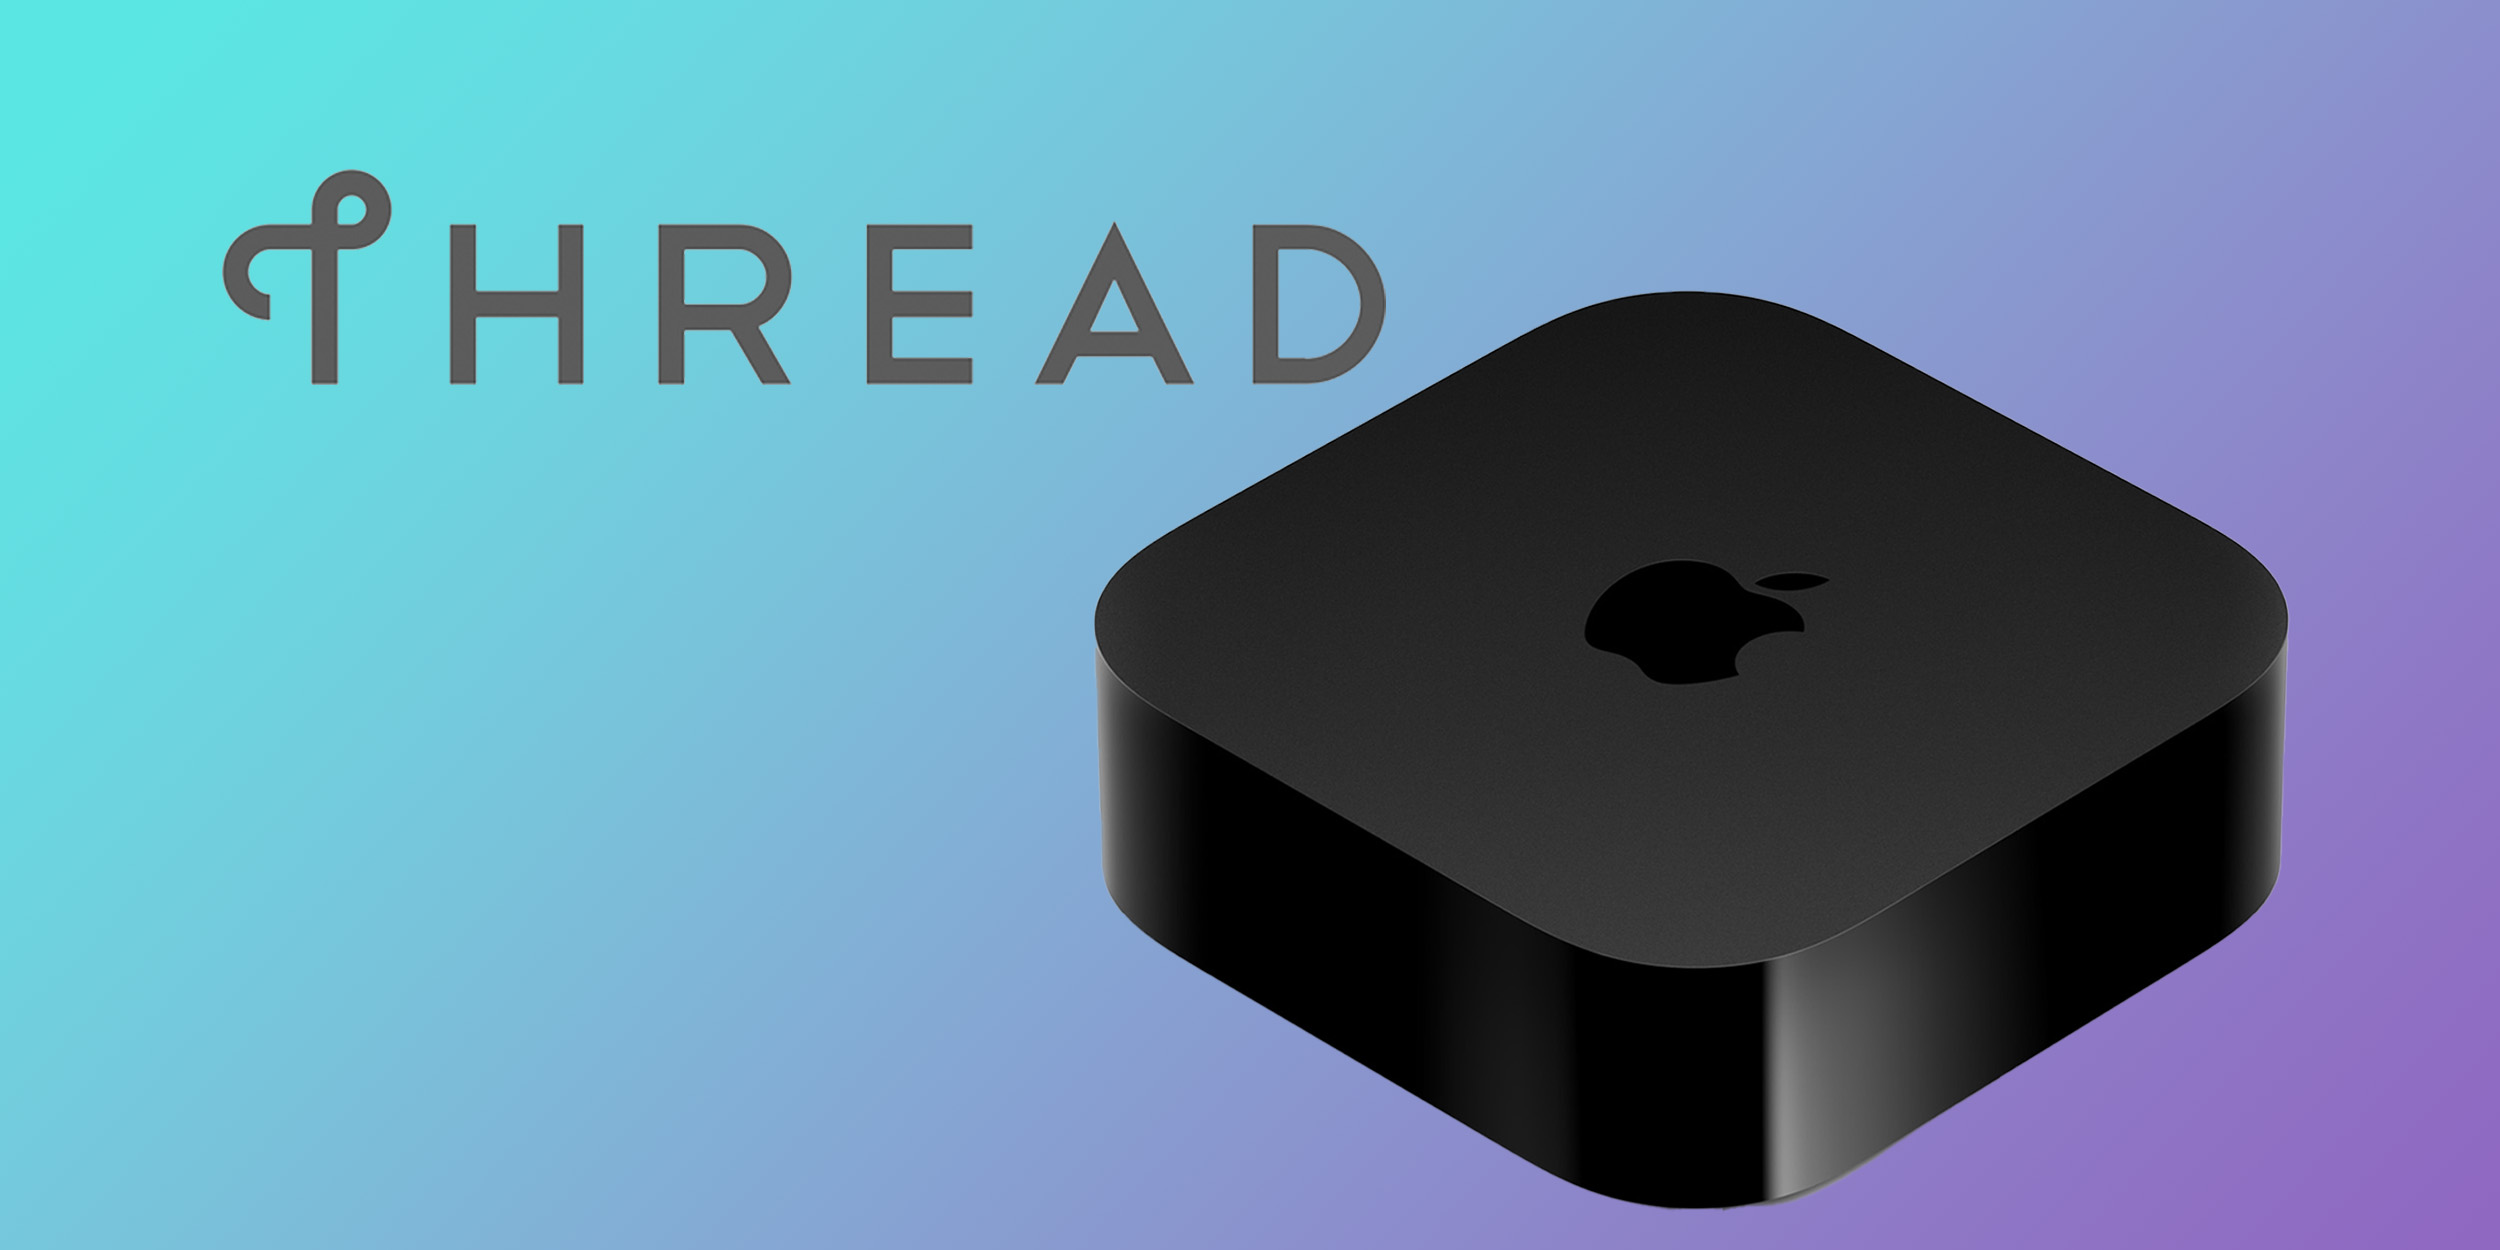 Updated Apple TV4K Adds Thread Support - Homekit News and Reviews